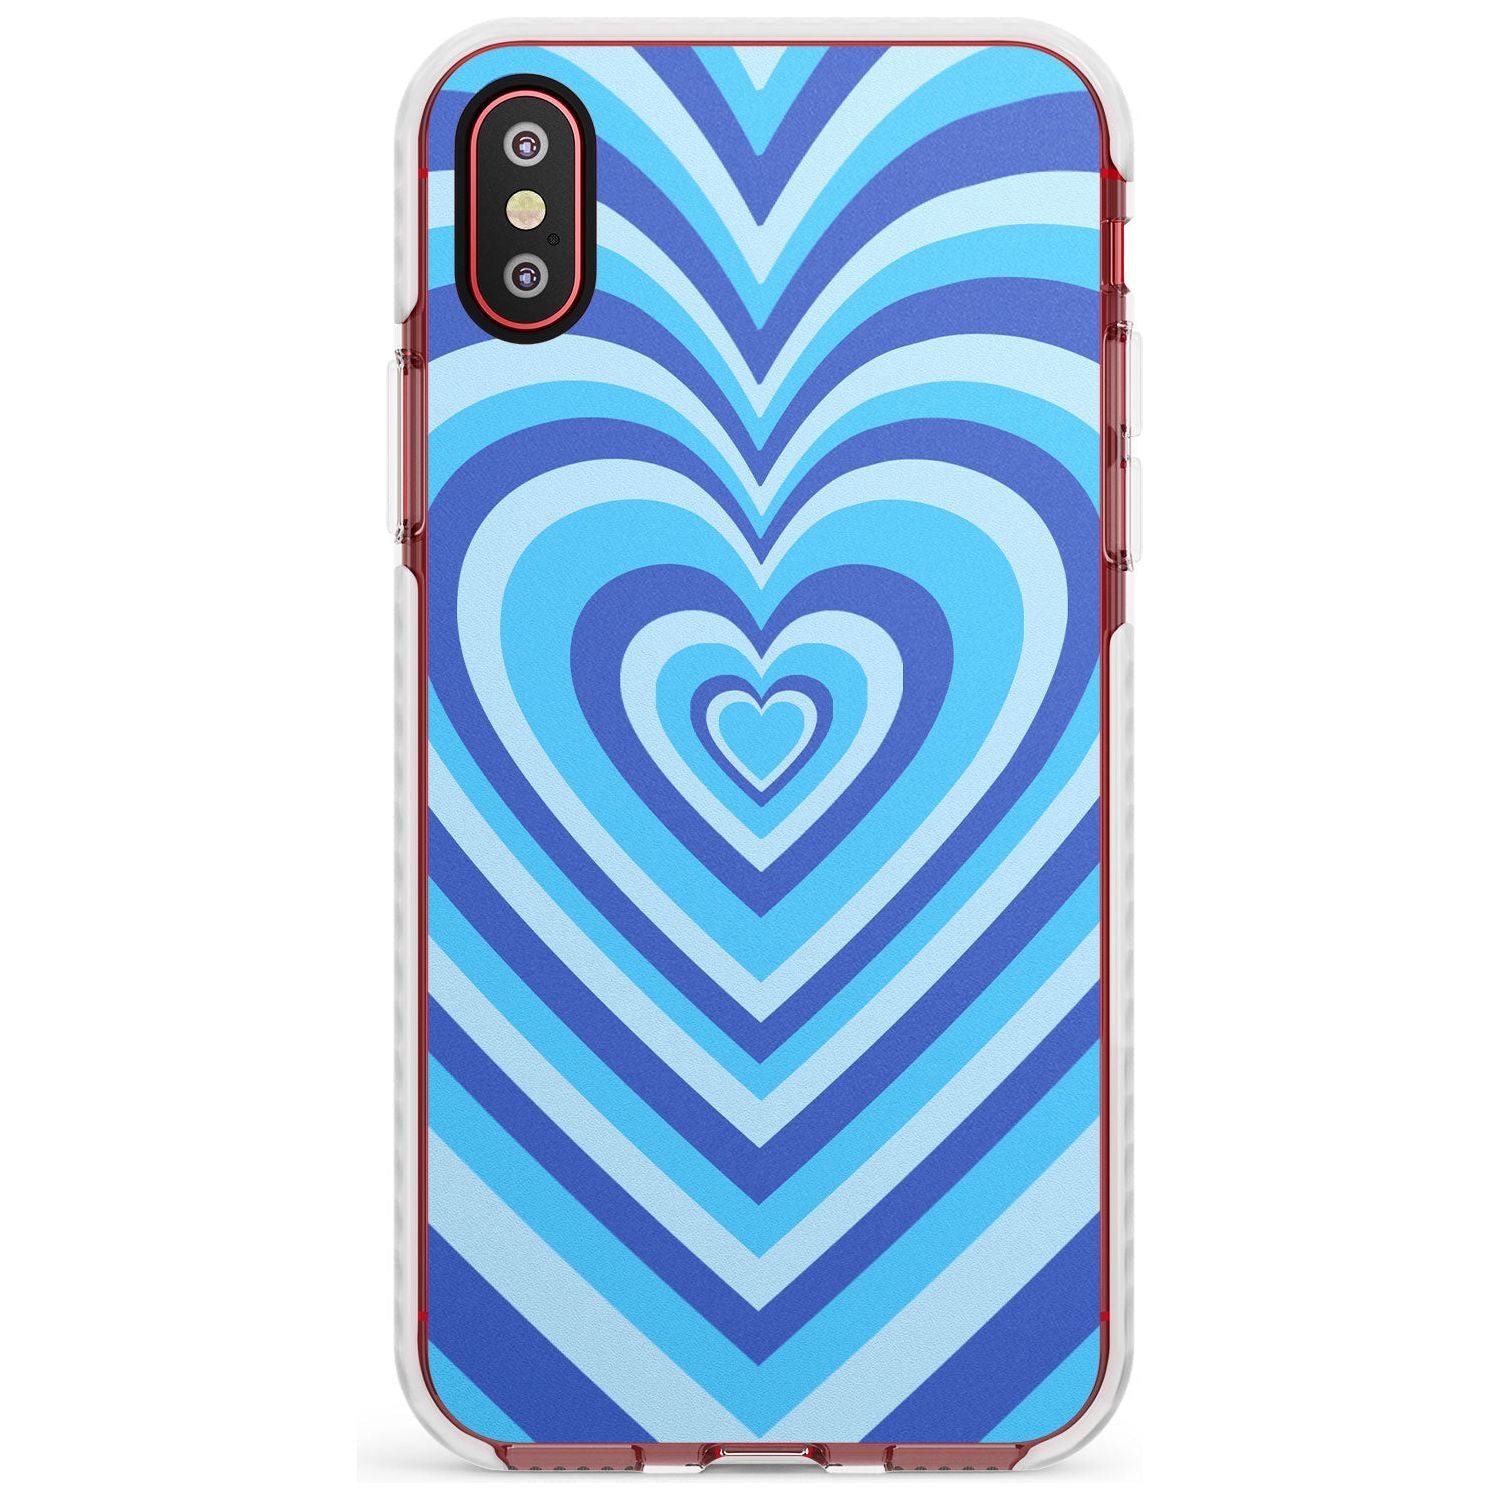 Blue Heart Illusion Impact Phone Case for iPhone X XS Max XR